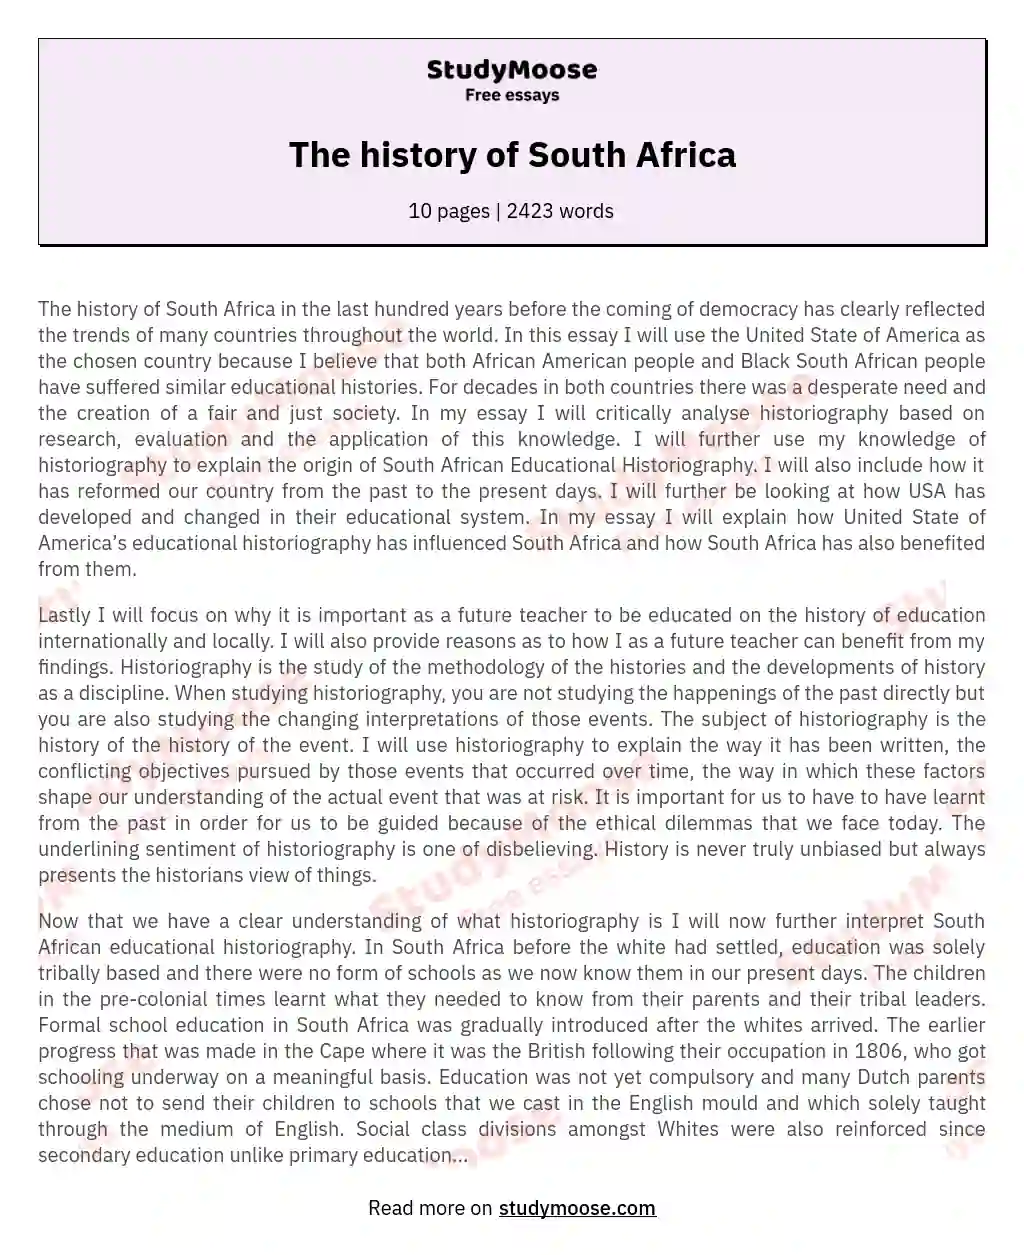 The history of South Africa essay